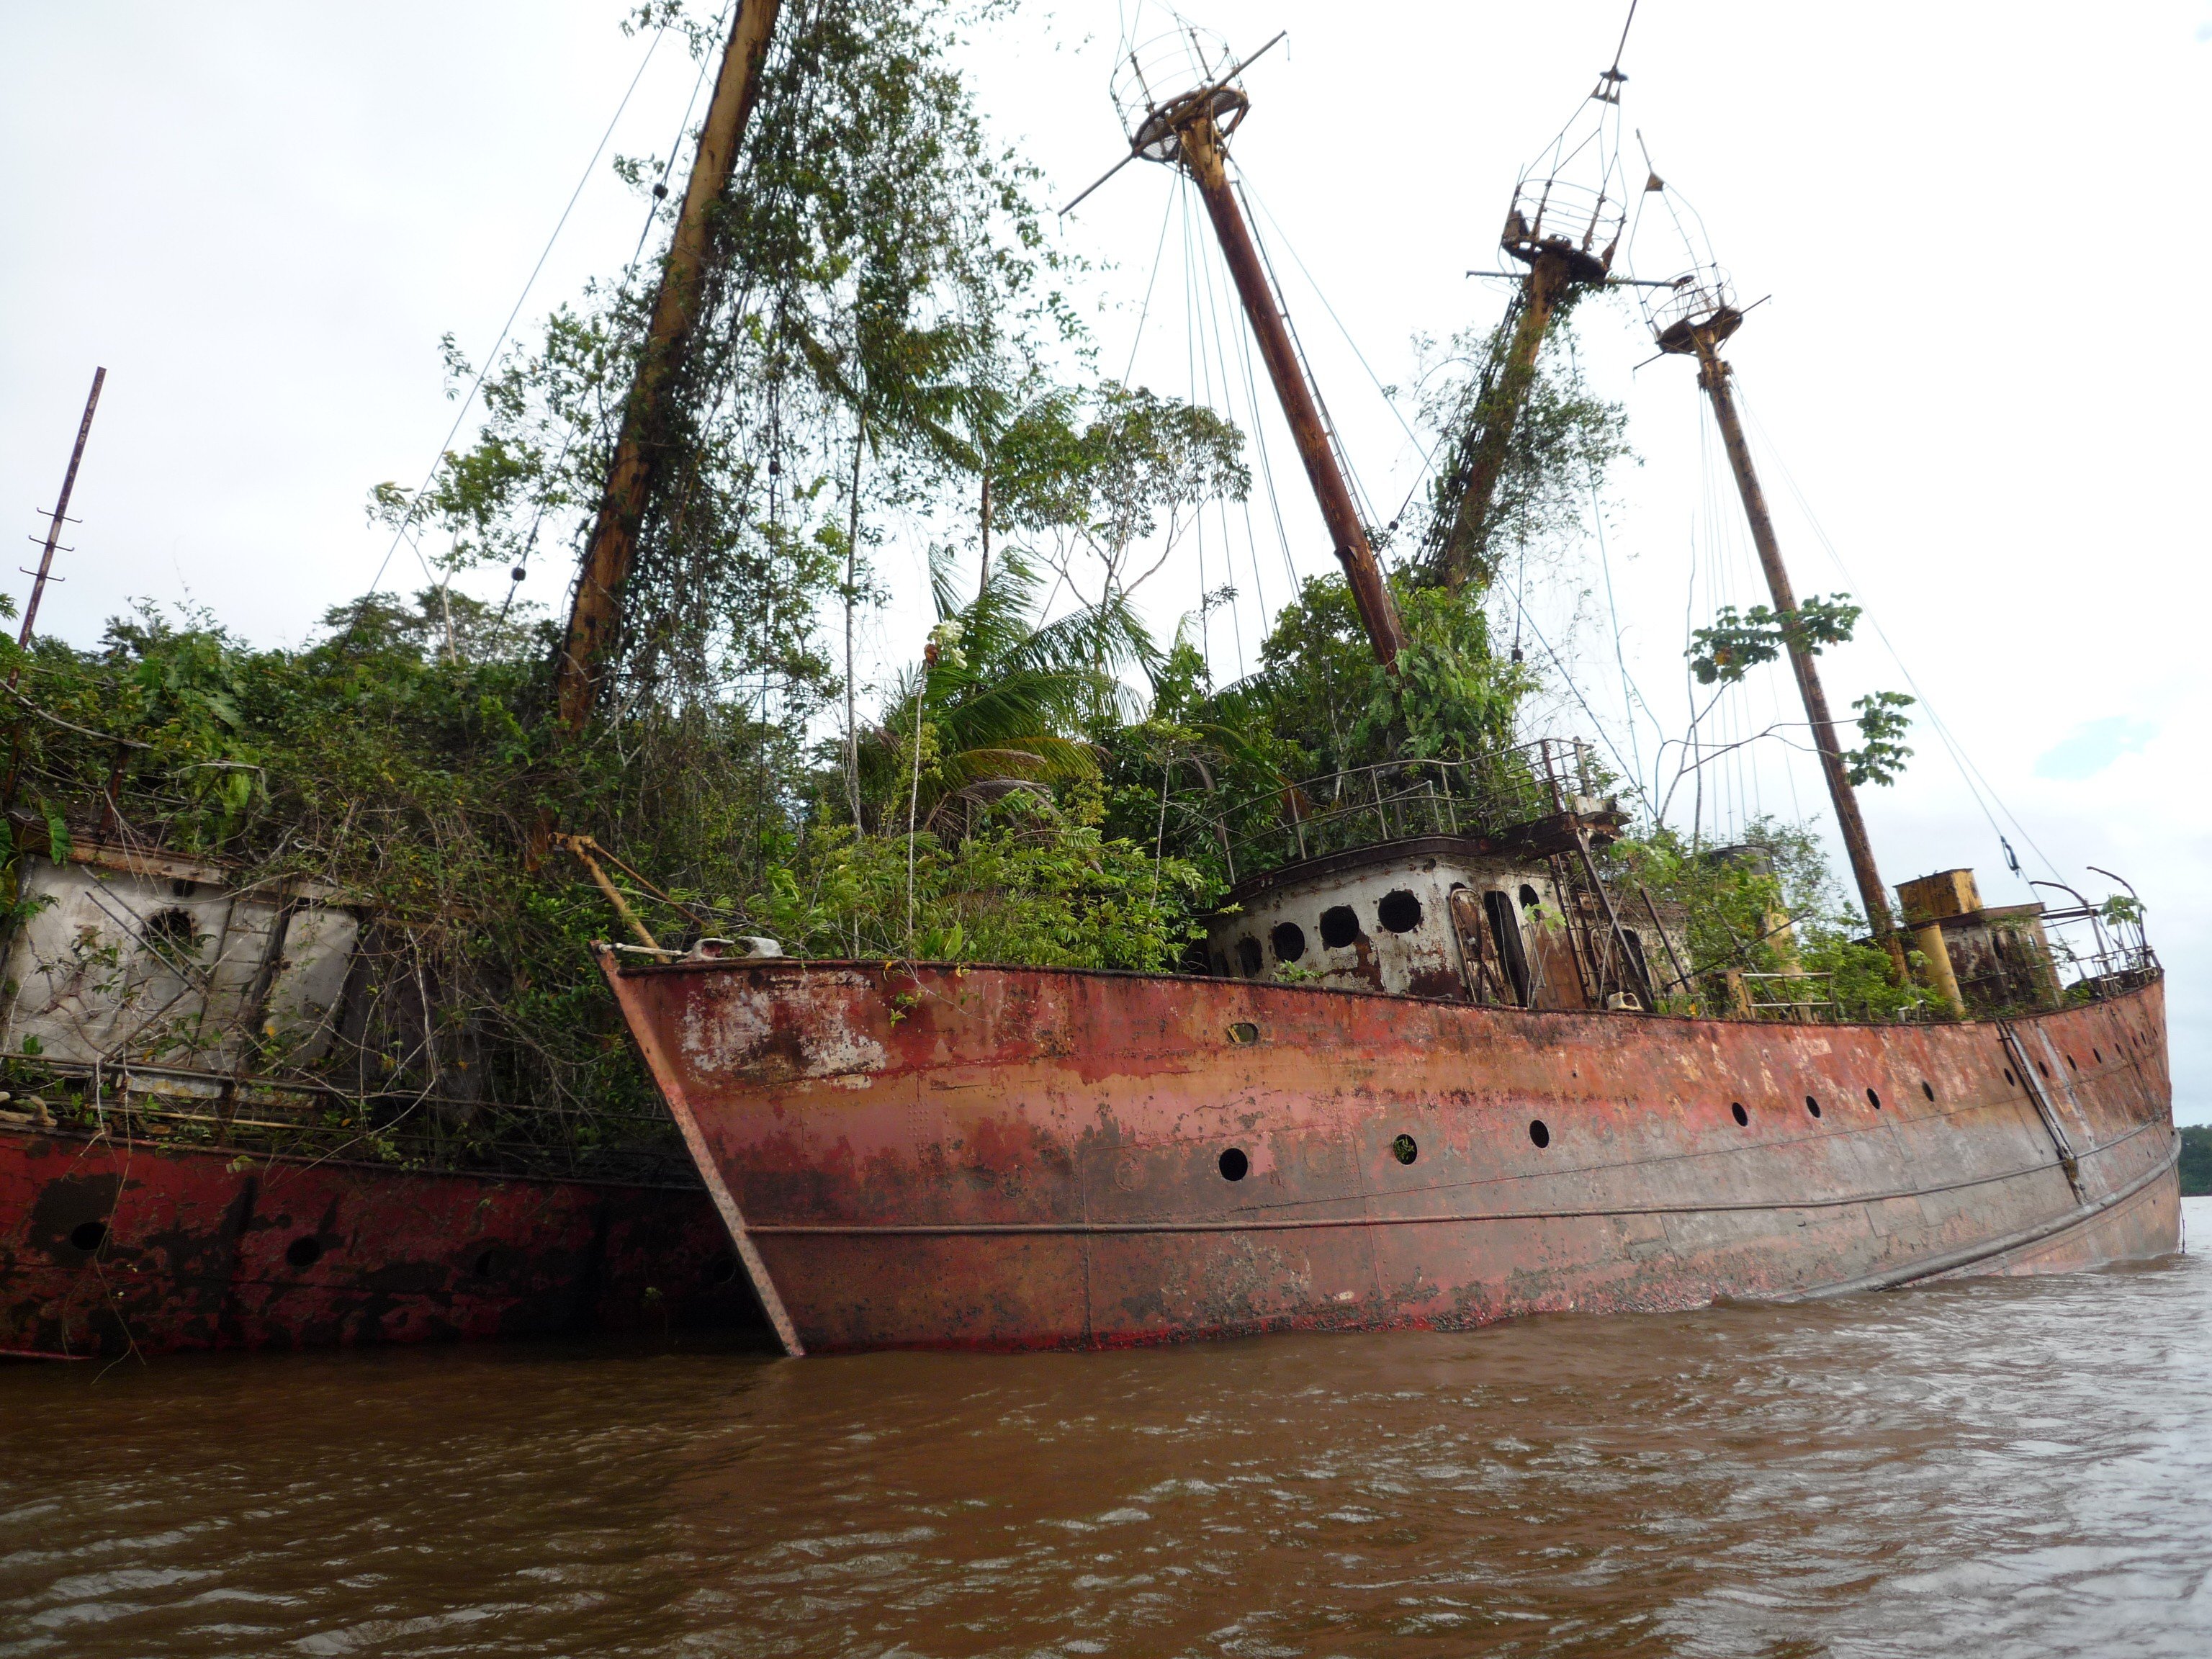 ship, Old ship, Rust in Peace, Trees, Shipwreck Wallpaper